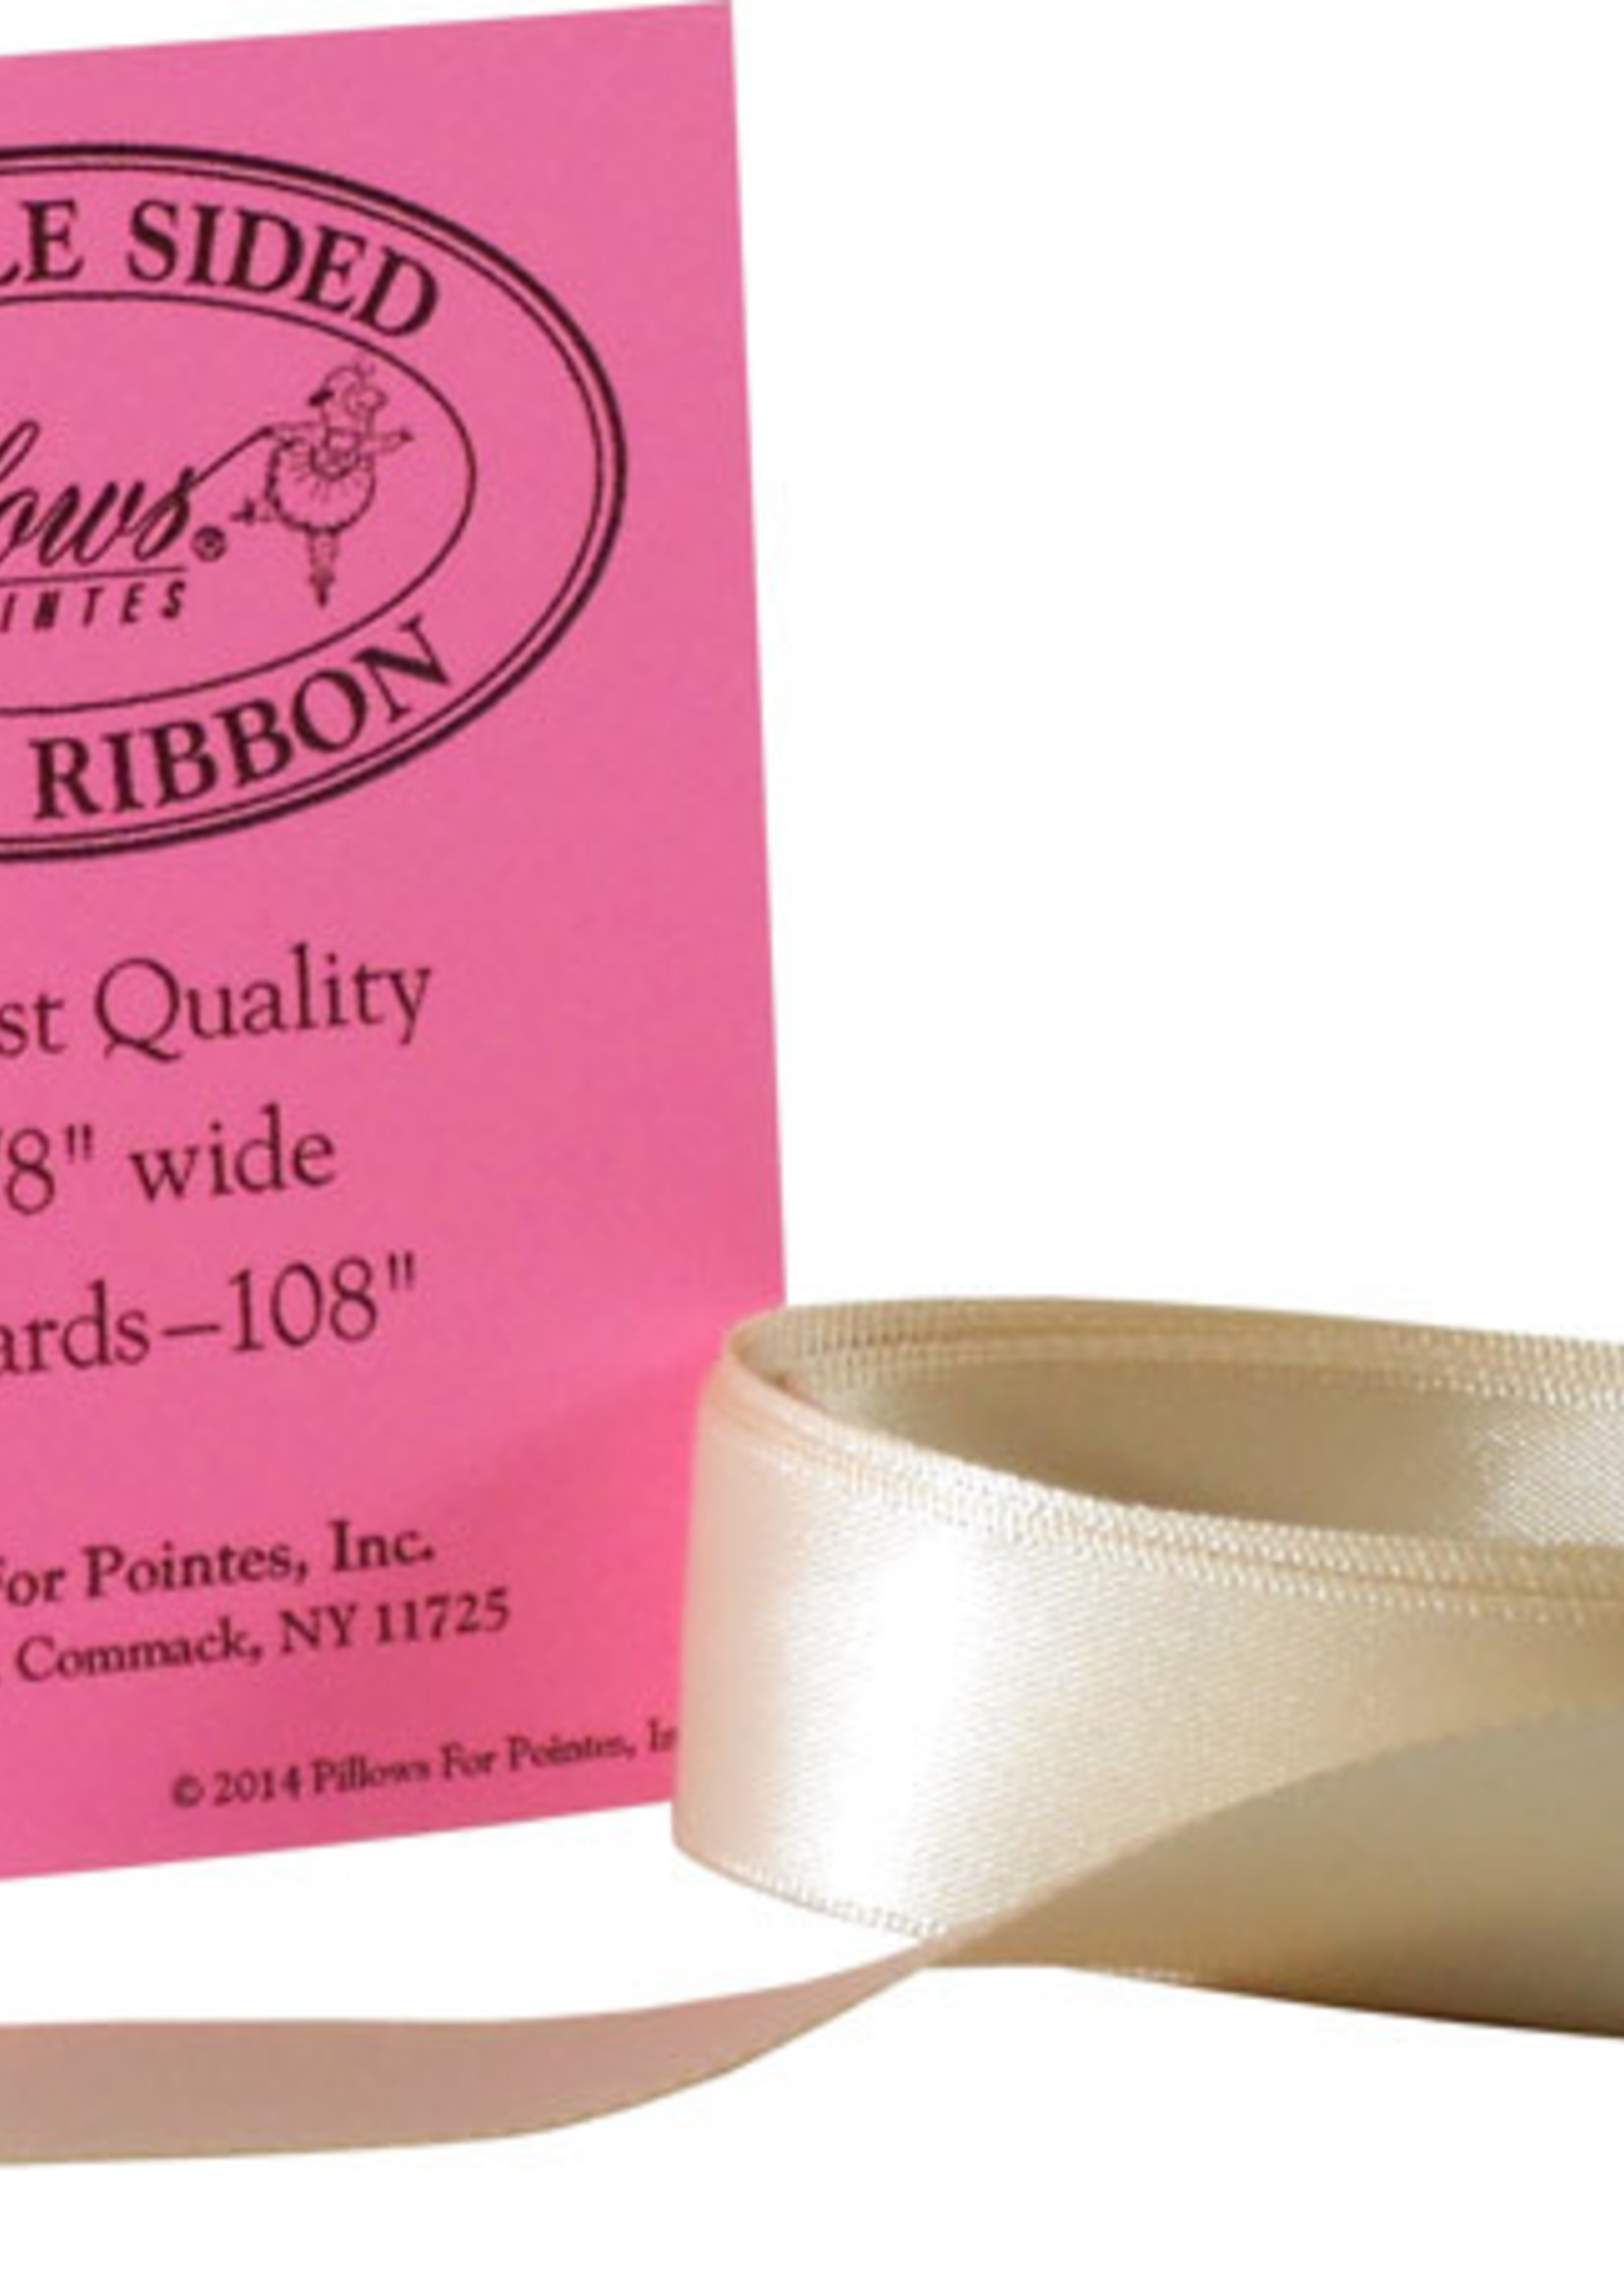 Pillows for Pointe Pillows for Pointe Classic Satin Ribbon